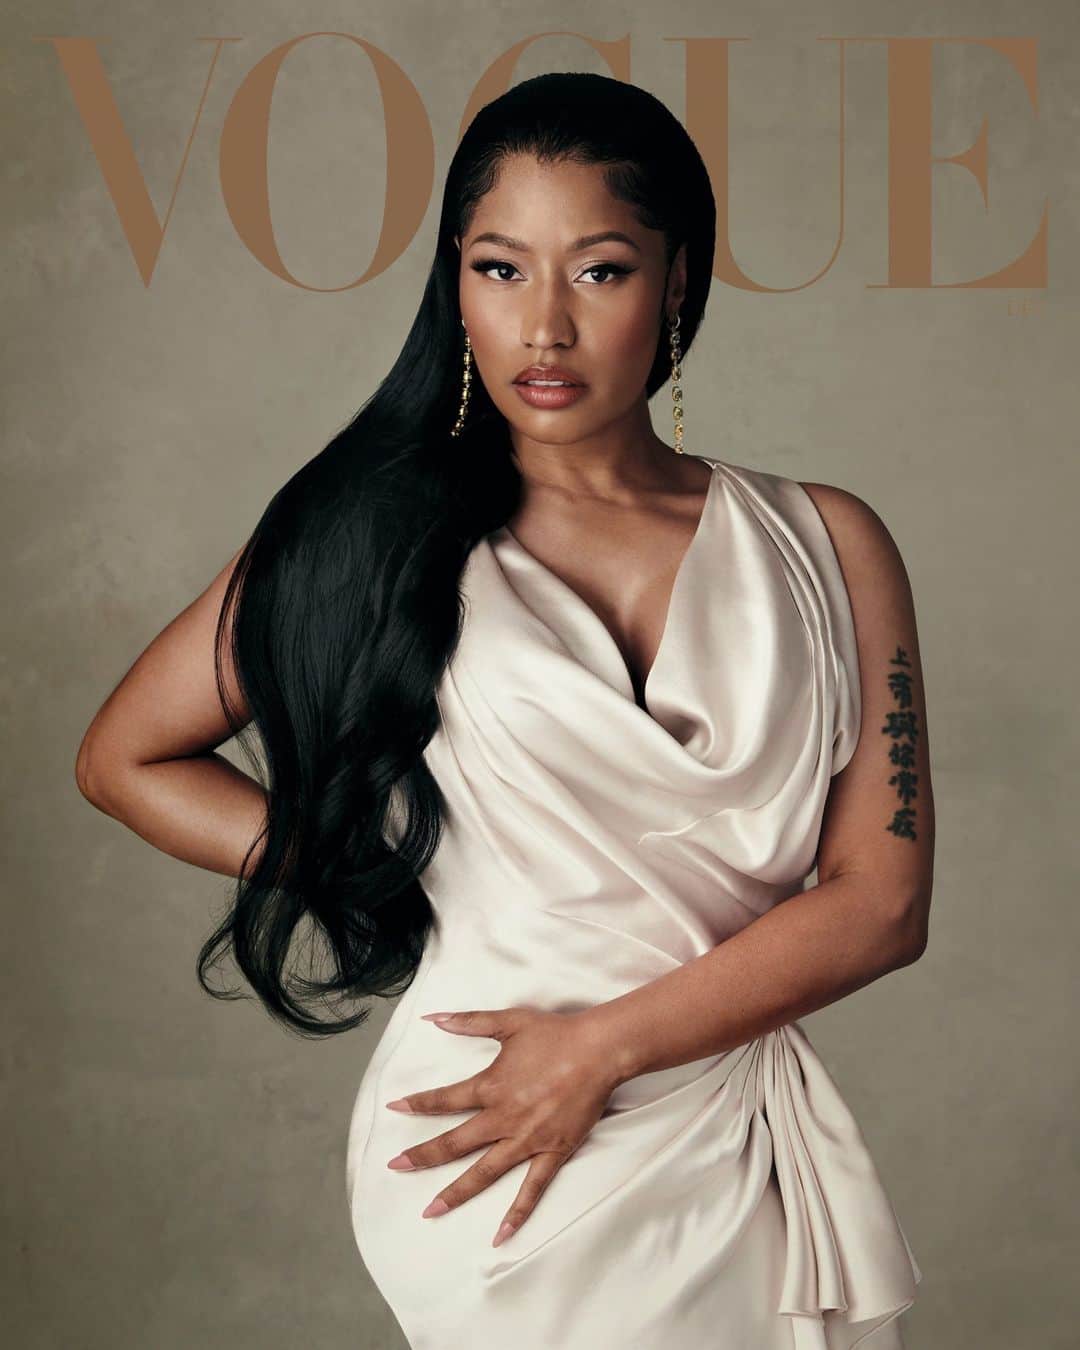 Vogue Runwayのインスタグラム：「“There’s a freeness that you have around you when you’re at your best, when you’re doing your thing at your peak.” So says Nicki Minaj, who has been hard at work writing, recording,  mixing, and re-mixing her fifth studio album, “Pink Friday 2,” out next month. For the best-selling female rapper of all time, now 13 years into her career, the new record represents a return to form. “When I look back at a lot of my music, I’m like, Oh, my God, where was the me in it?” Minaj says. “So for this album, I went back to the old game plan.”   For Vogue’s December Issue, @nickiminaj opens up about her highly anticipated new project; giving birth to her son amid the isolative unease of the pandemic; and feeling at peace with her body—something that encourages in other women, too.  Tap the link in our bio to read the full profile. Photographed by @normanjeanroy, Written by @robertjhaskell, Styled by @maxortegag.」